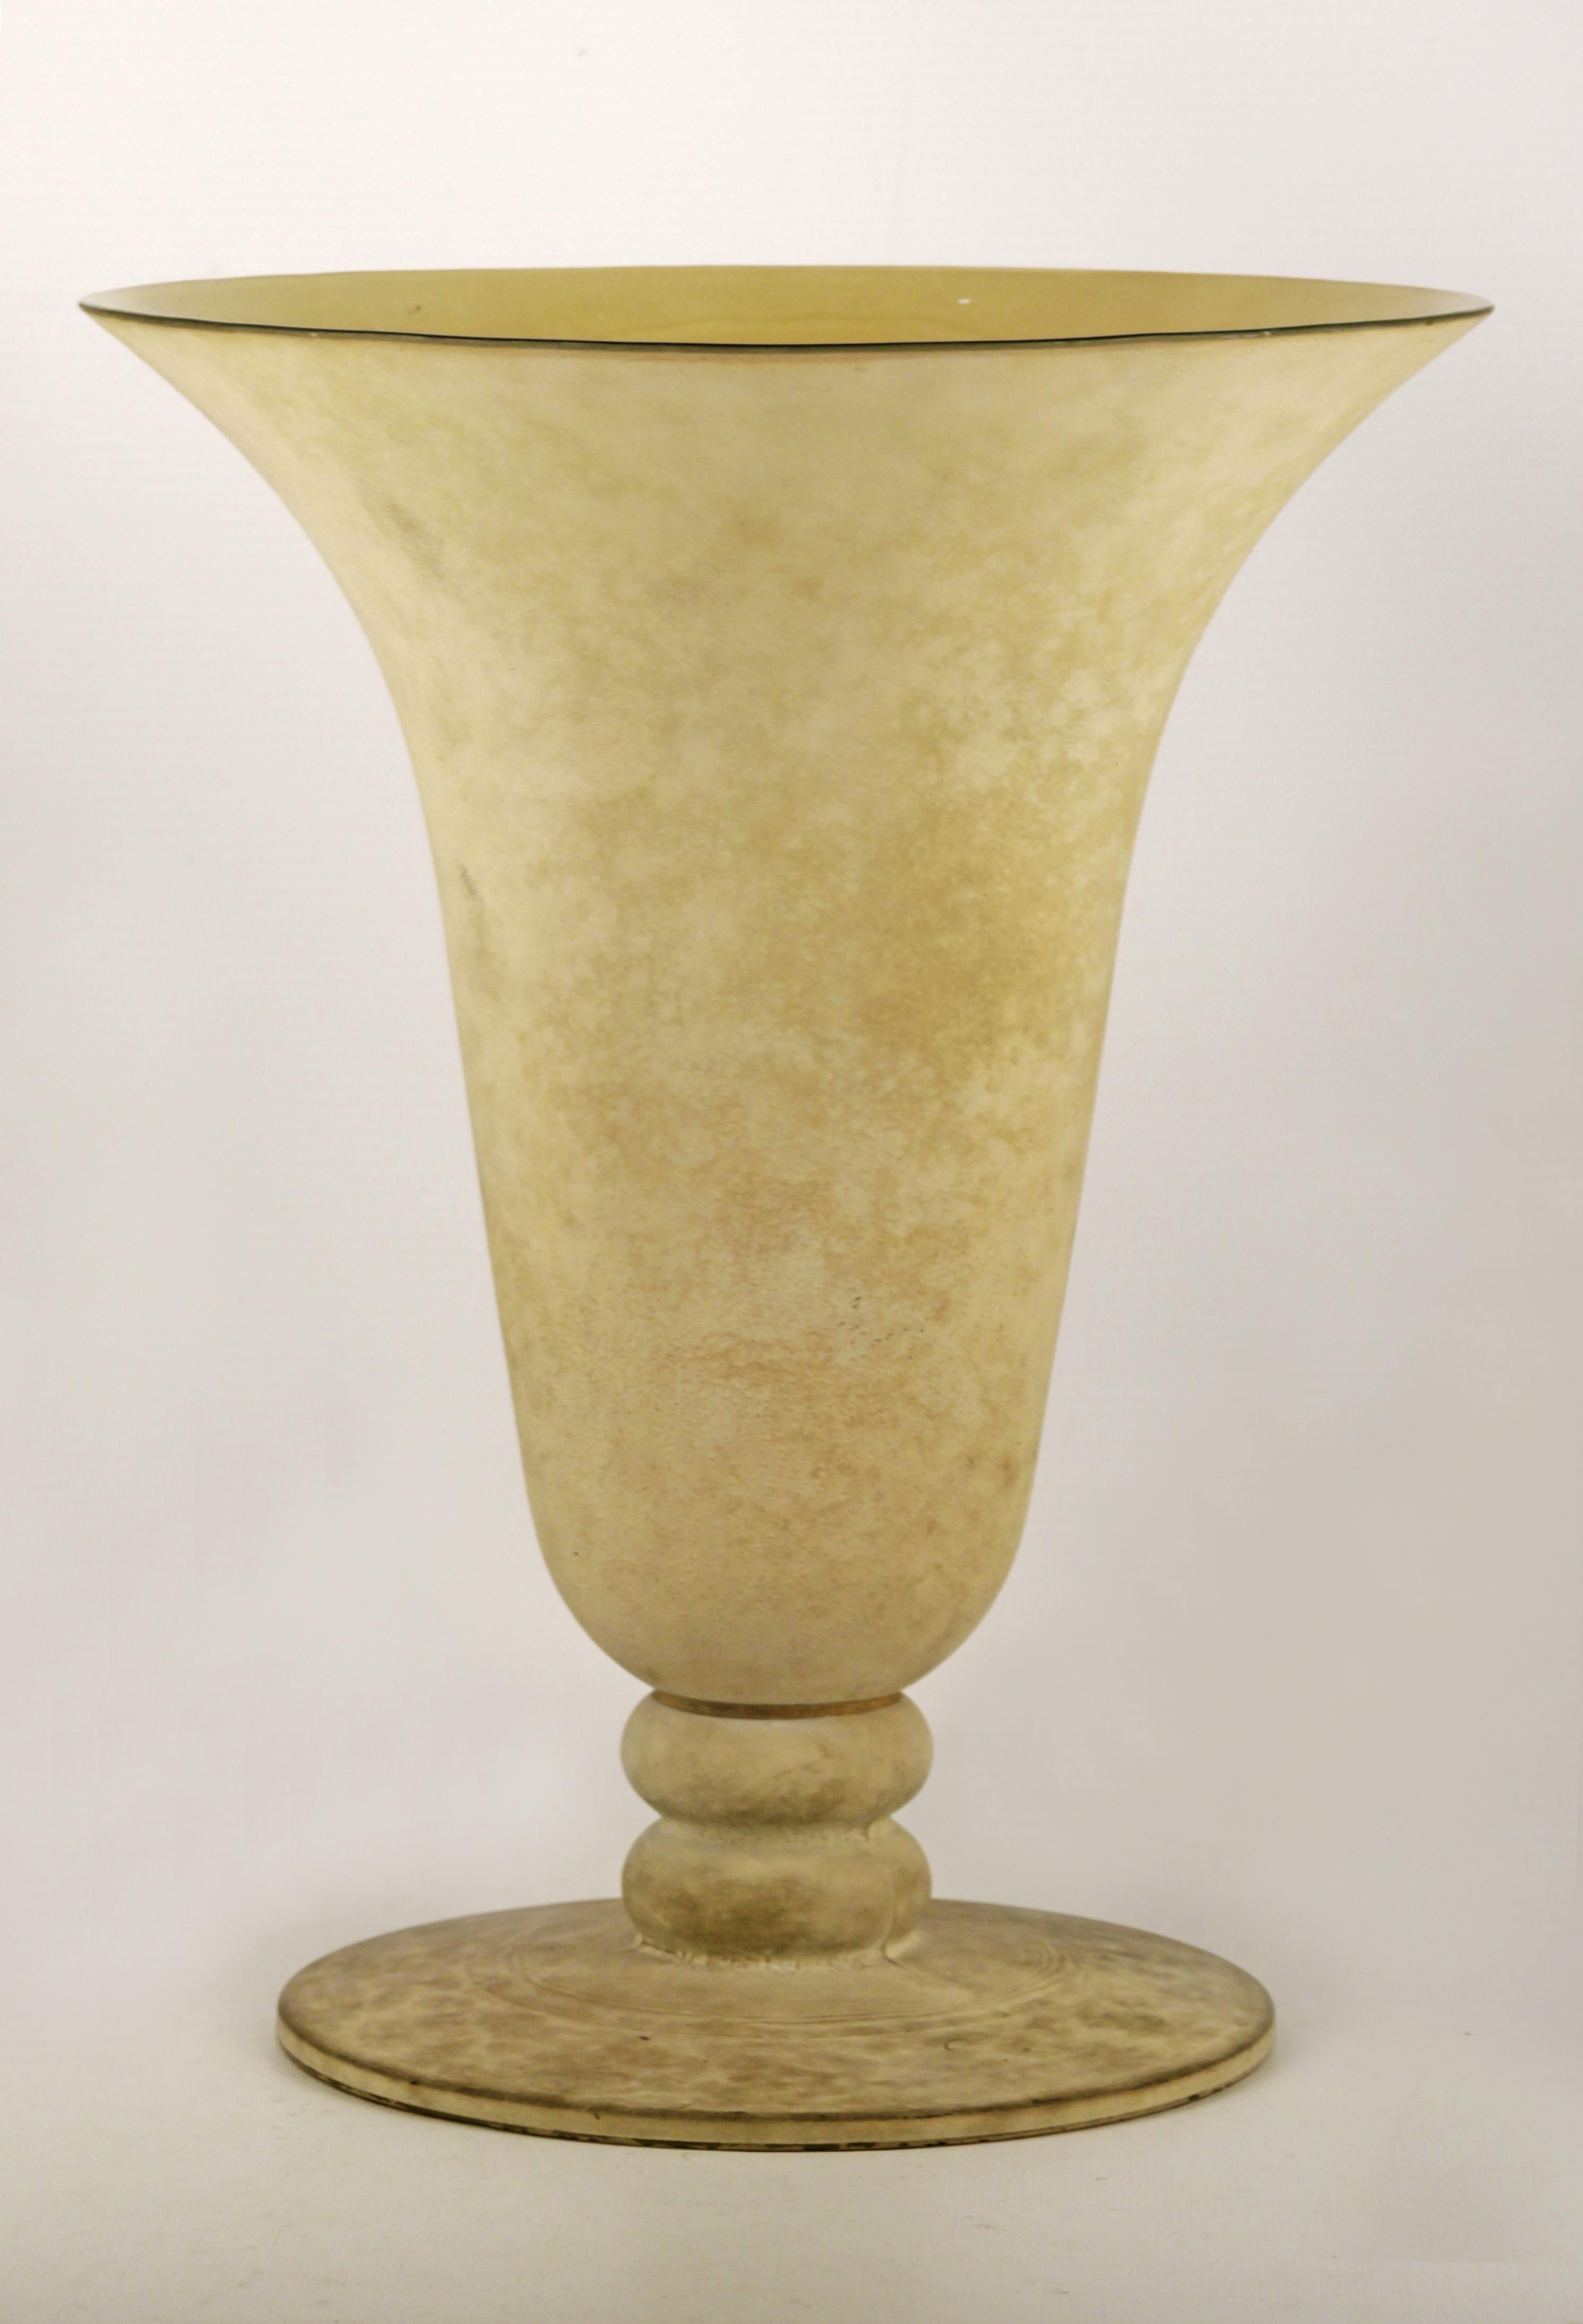 Early 20th century Modernist footed trumpet frosted glass broad vase by french decorator and designer André Groult

By: André Groult
Material: glass
Technique: glazed, cast, unglazed, frosted
Dimensions: 10 in x 12 in
Date: early 20th century, circa